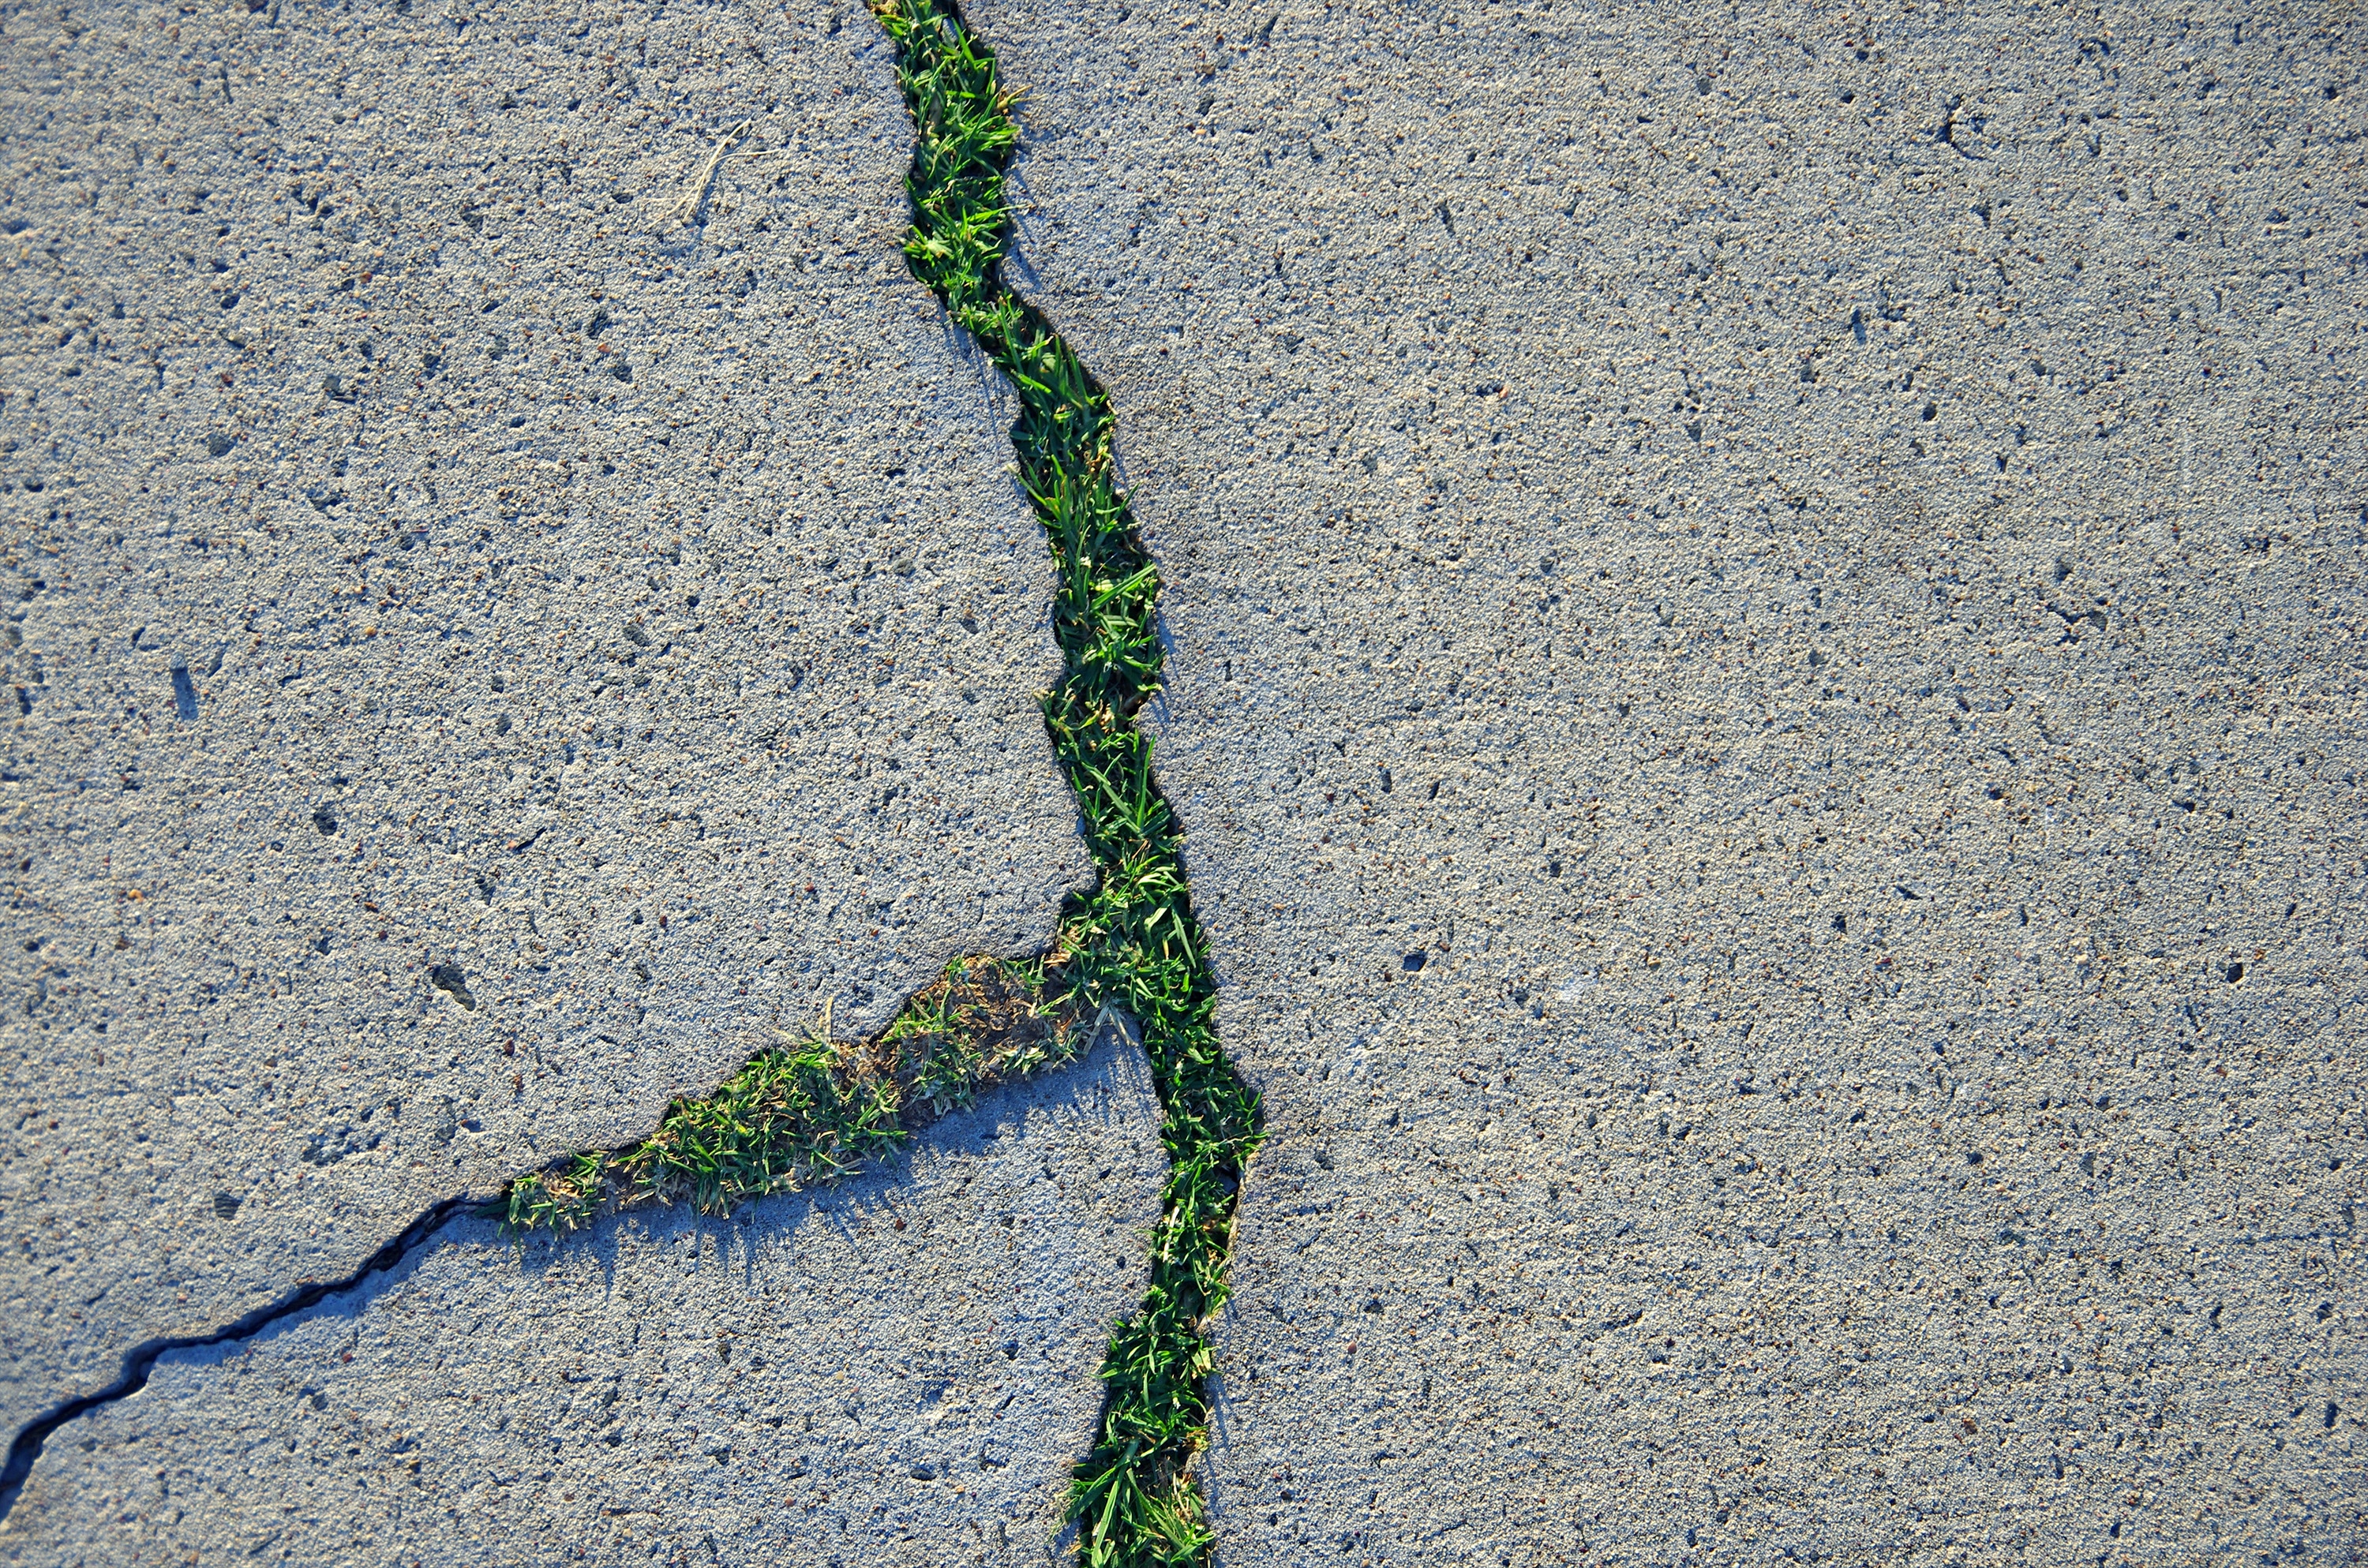 Grass growing through cracks in a concrete footpath